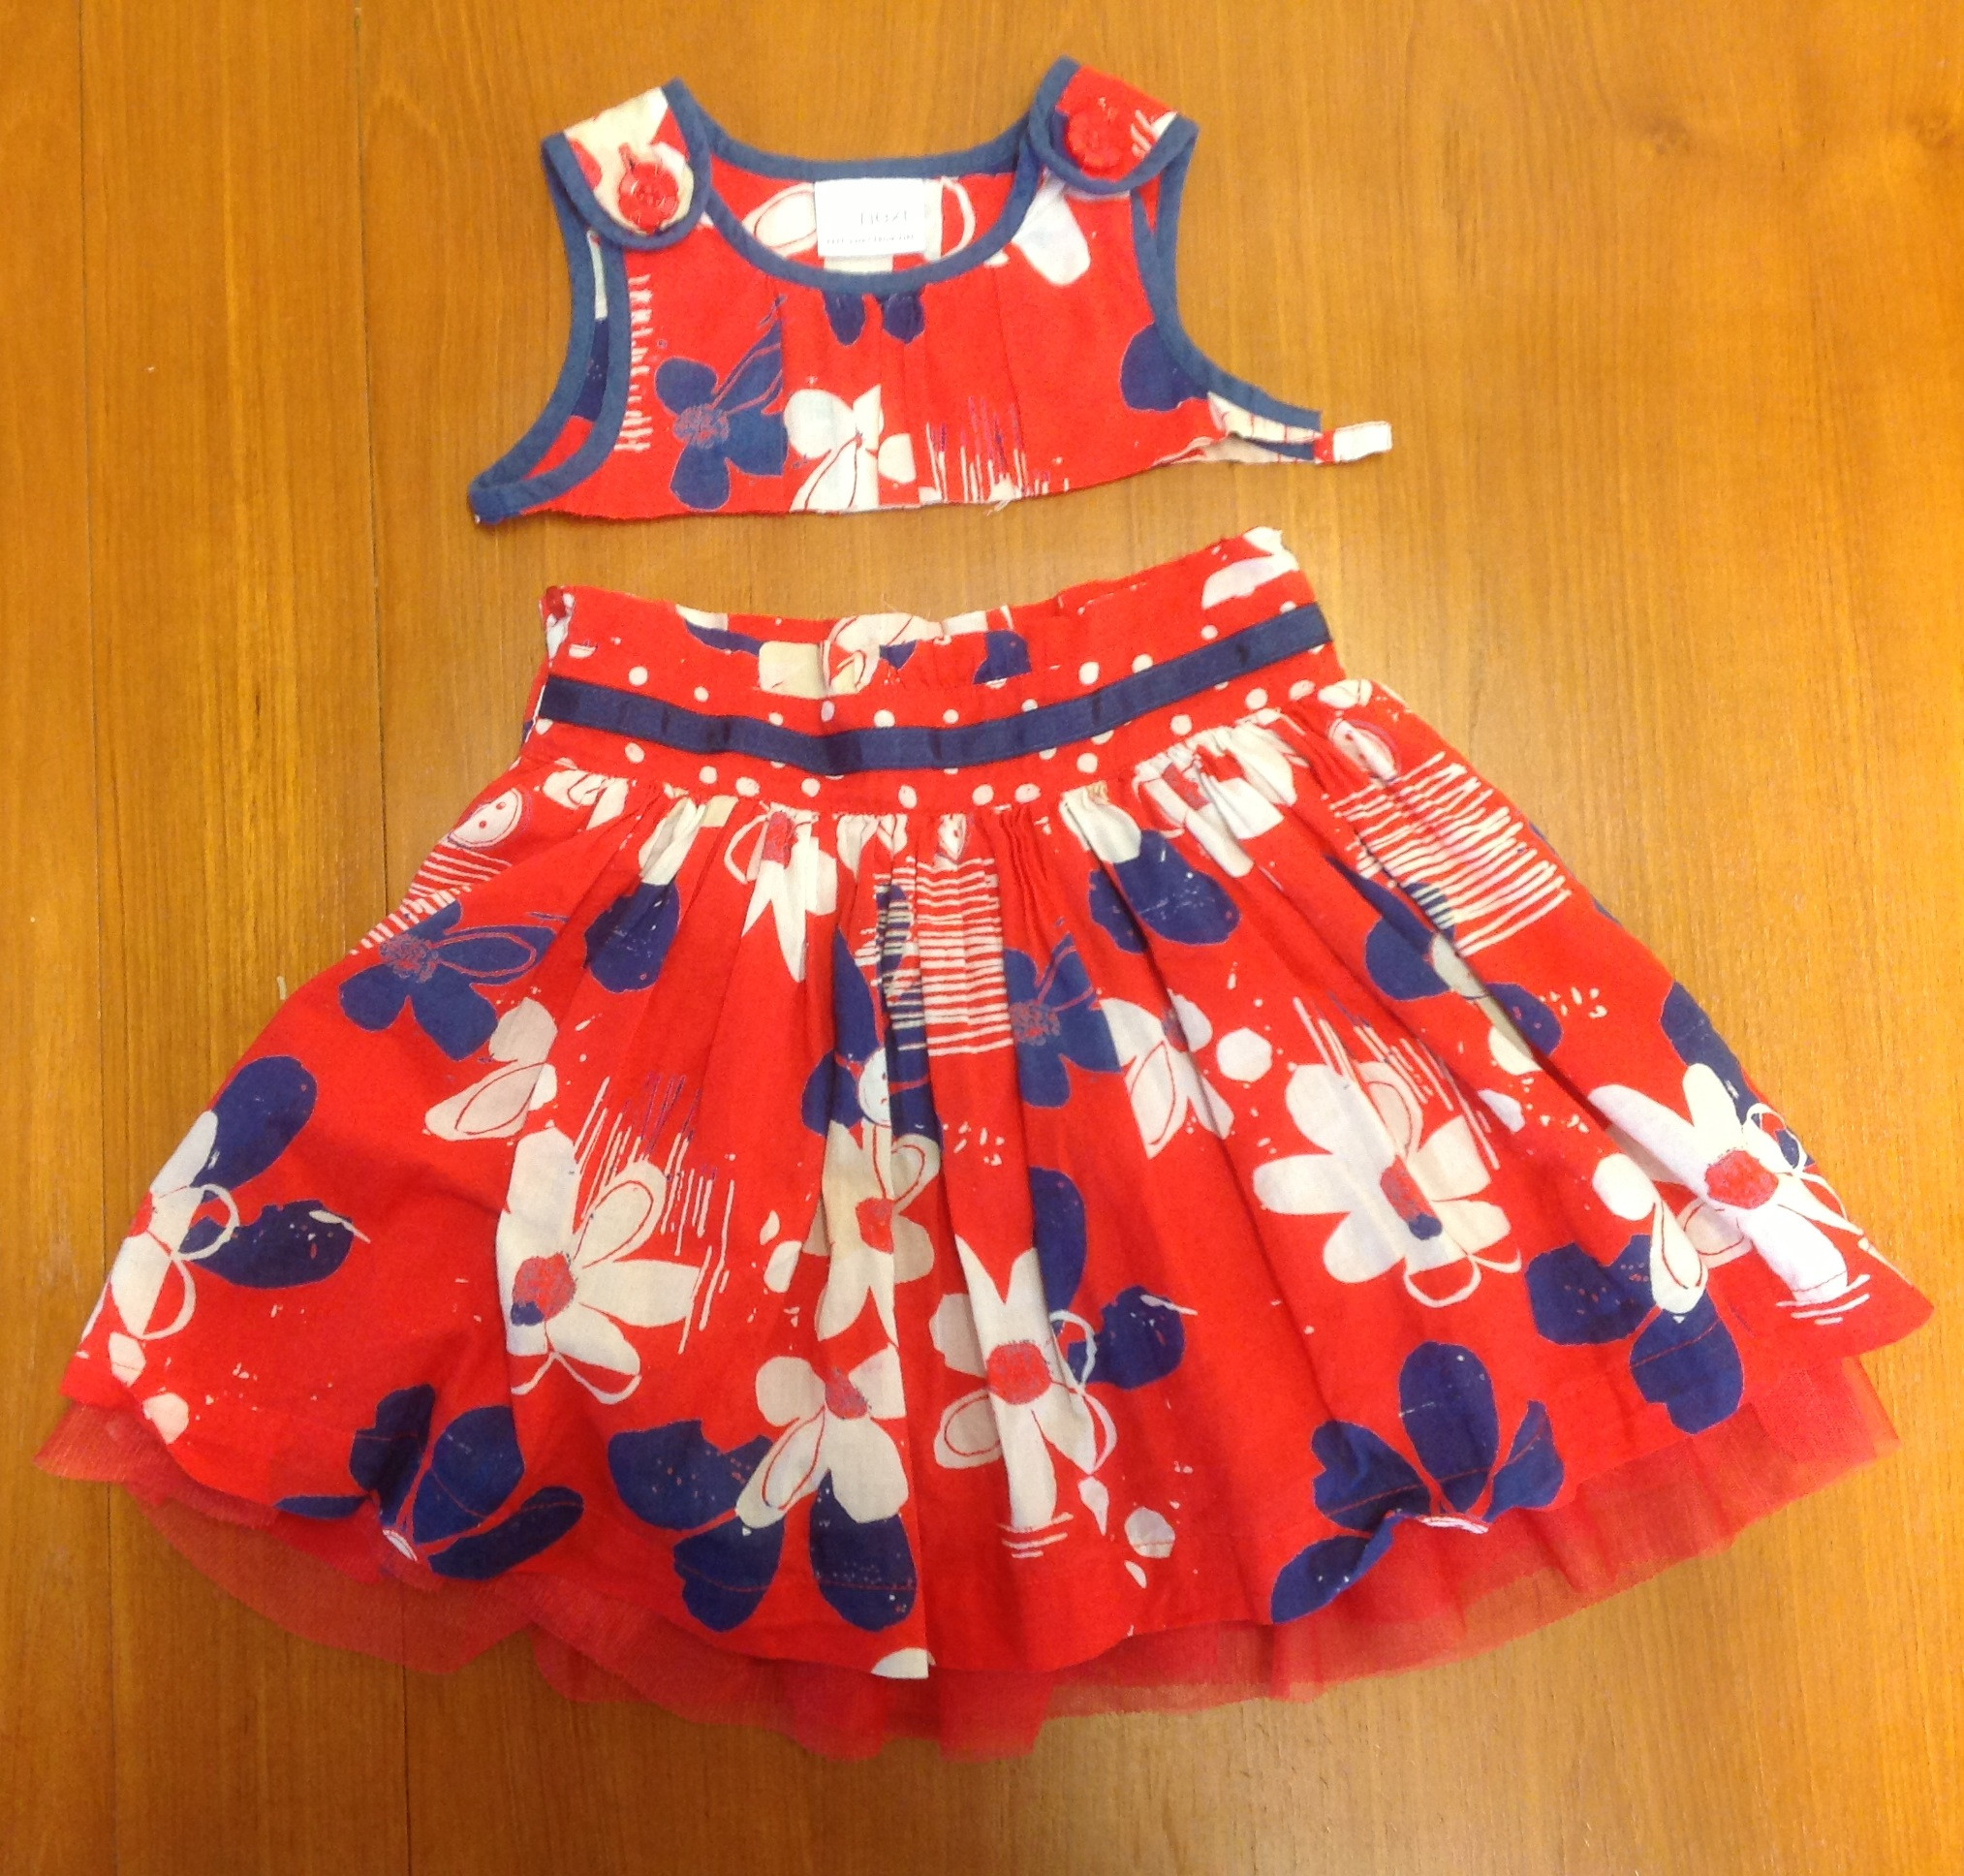 DIY Toddler Dresses
 Easy DIY Skirt from Toddler Dress – Crafter in the attic